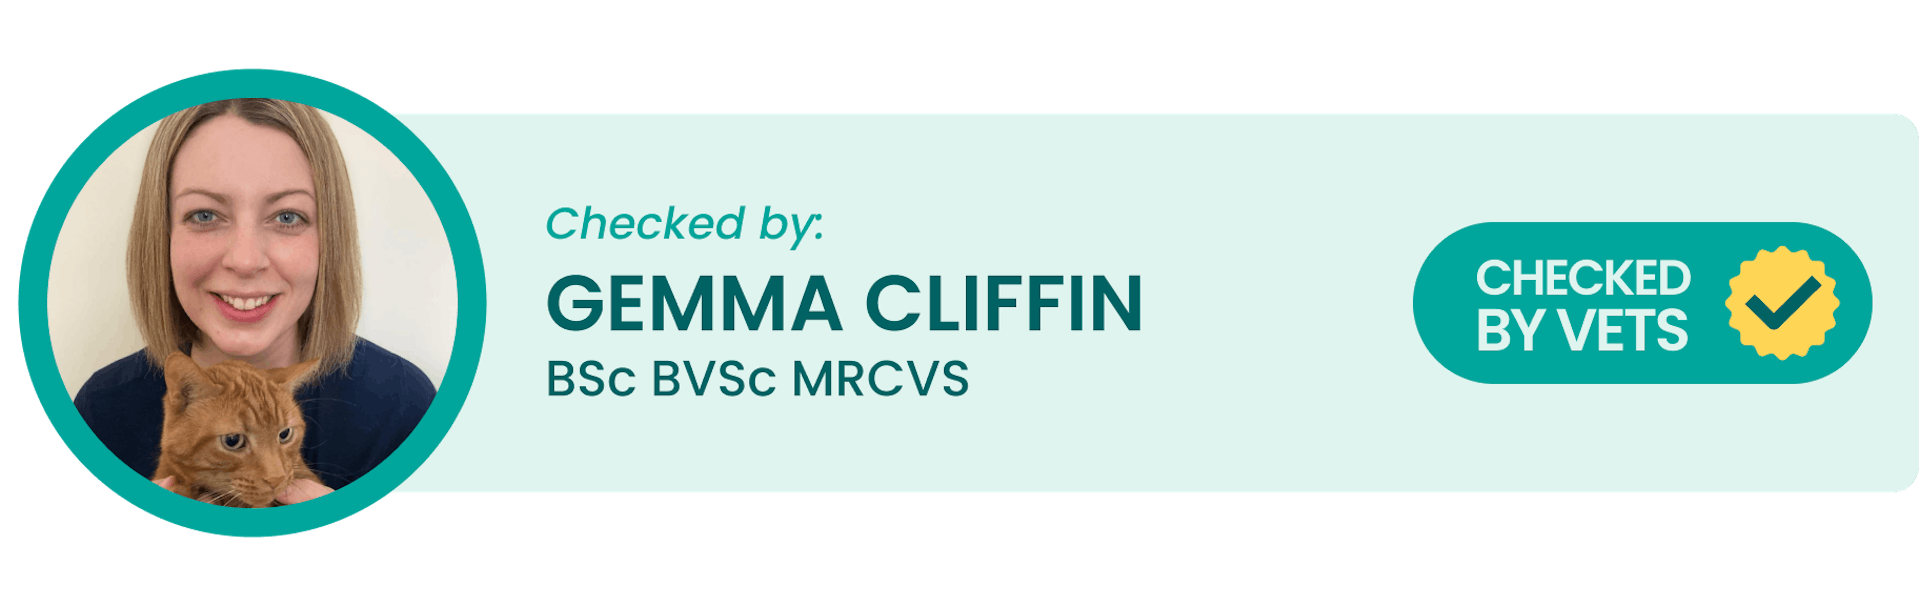 Checked by vets - Gemma Cliffin